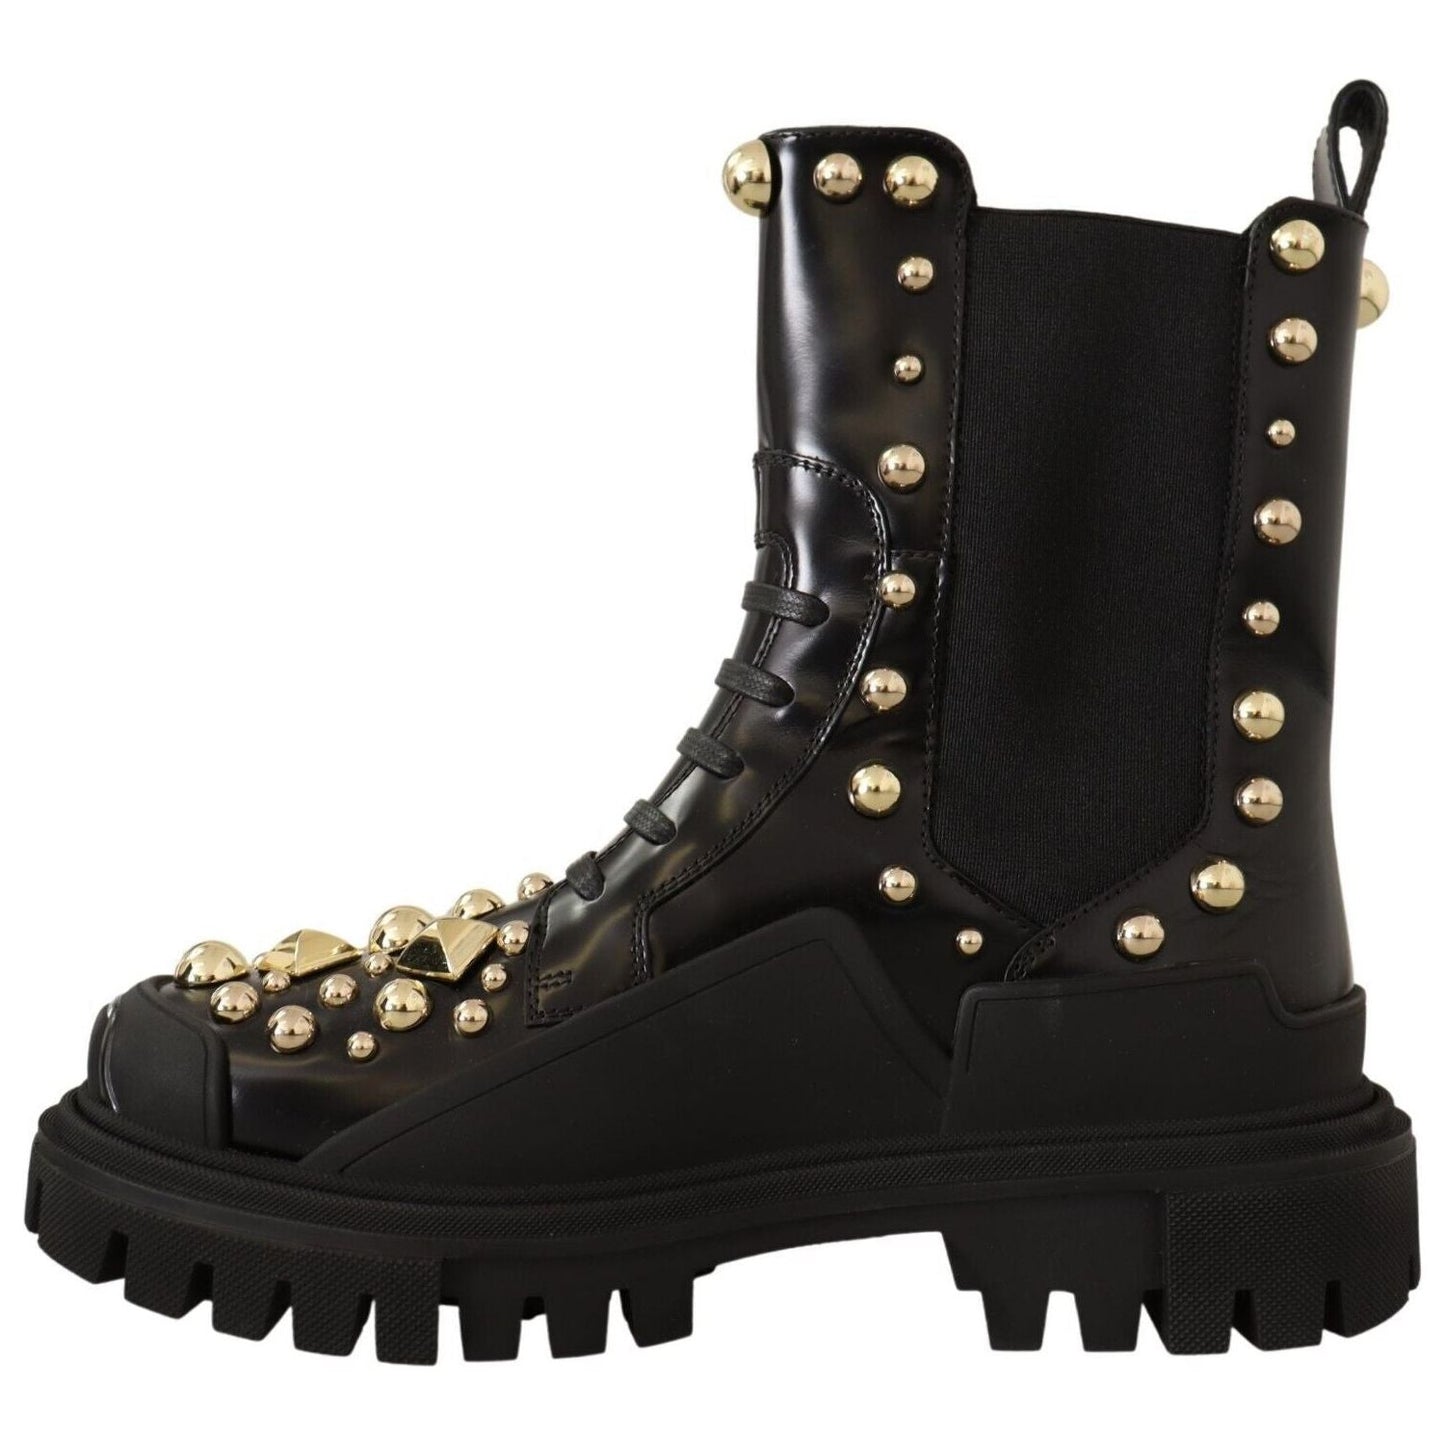 Dolce & Gabbana Studded Leather Combat Boots with Embroidery WOMAN BOOTS black-leather-studded-combat-boots